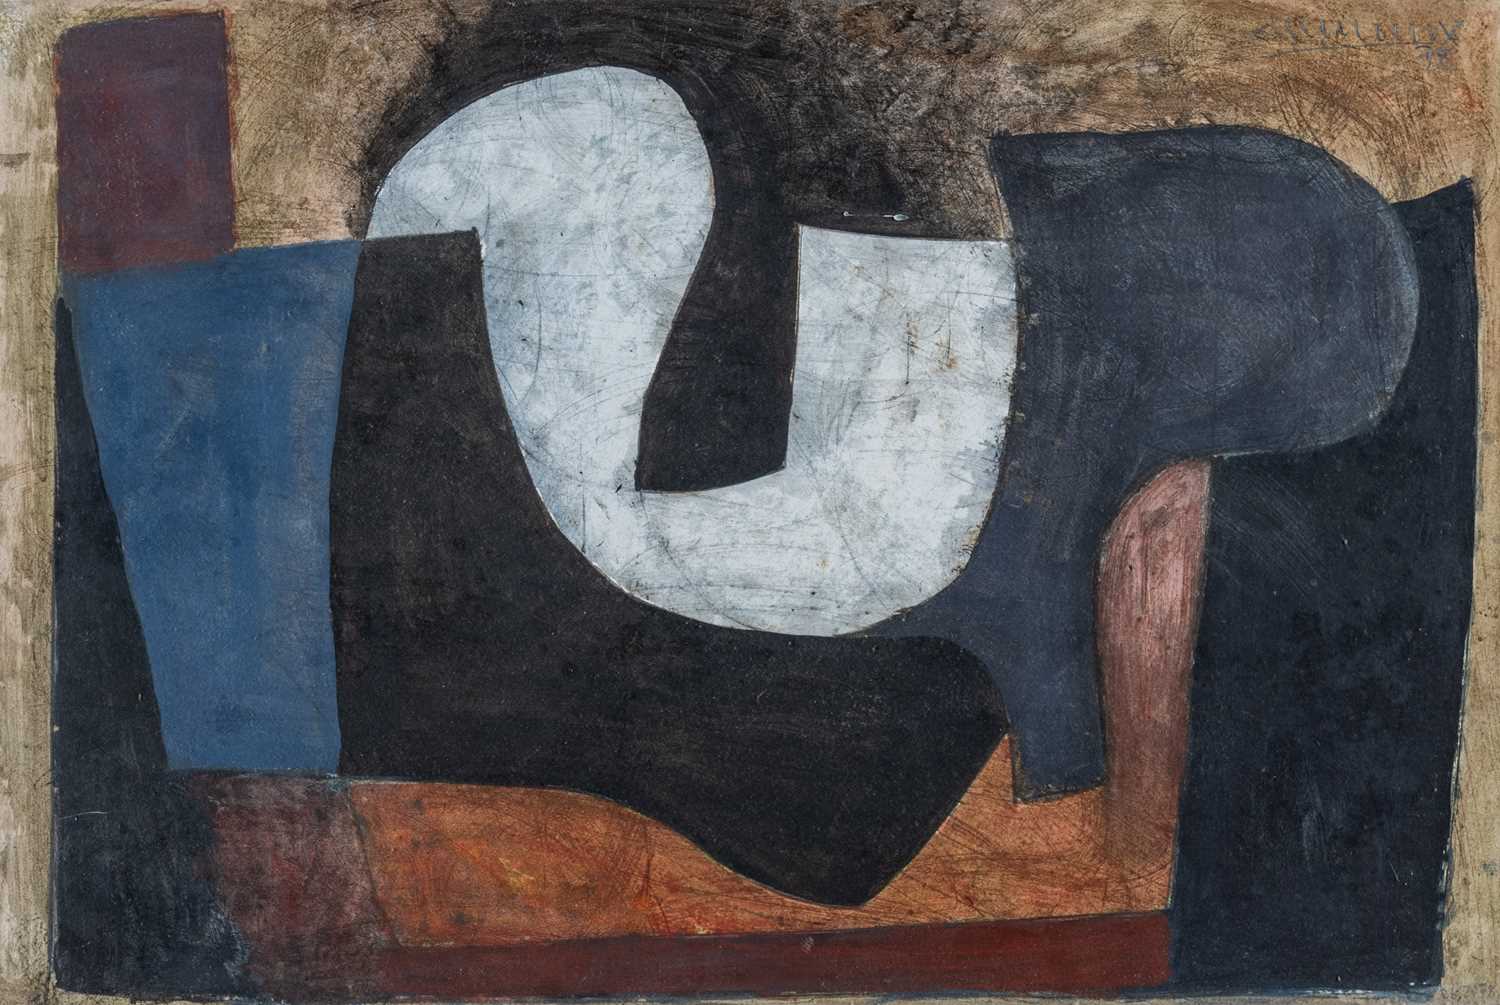 ‡ ROY TURNER DURRANT (1925-1998) mixed media including acrylics on paper - entitled verso '